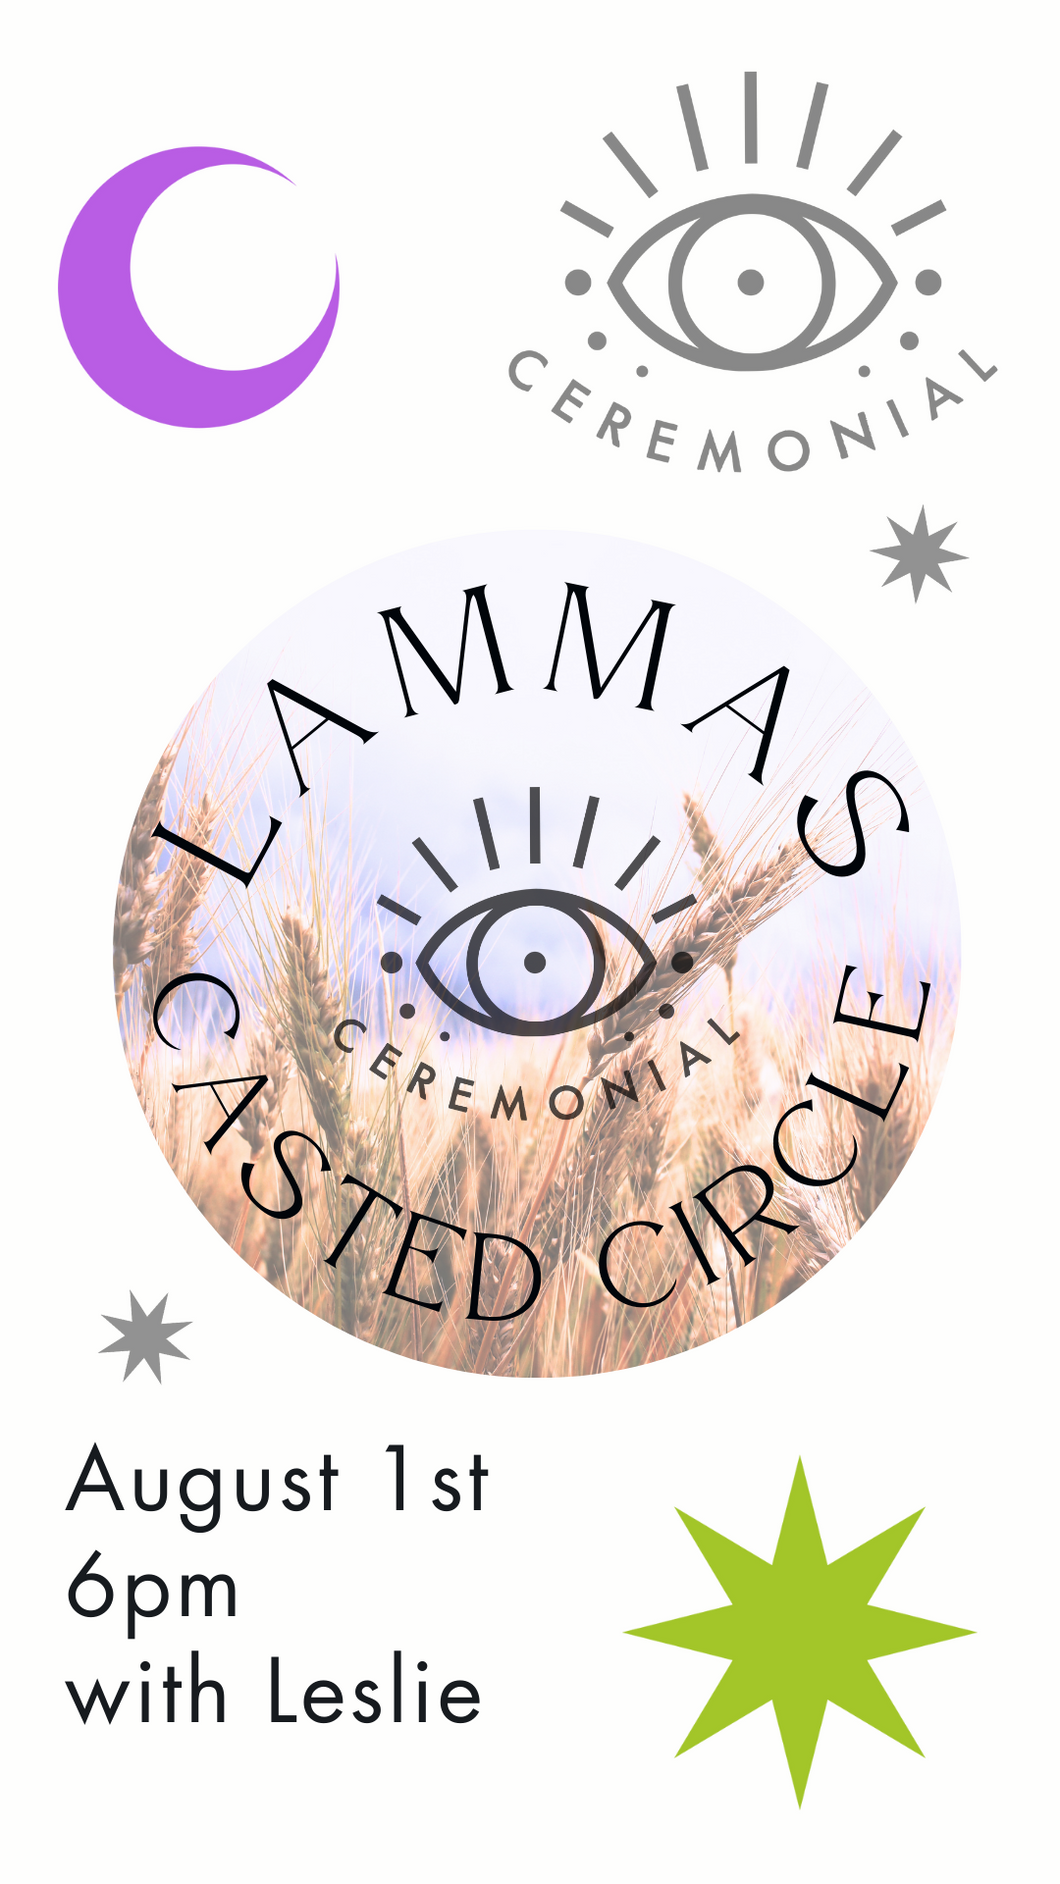 Lammas Casted Circle * Thursday, August 1st at 6pm